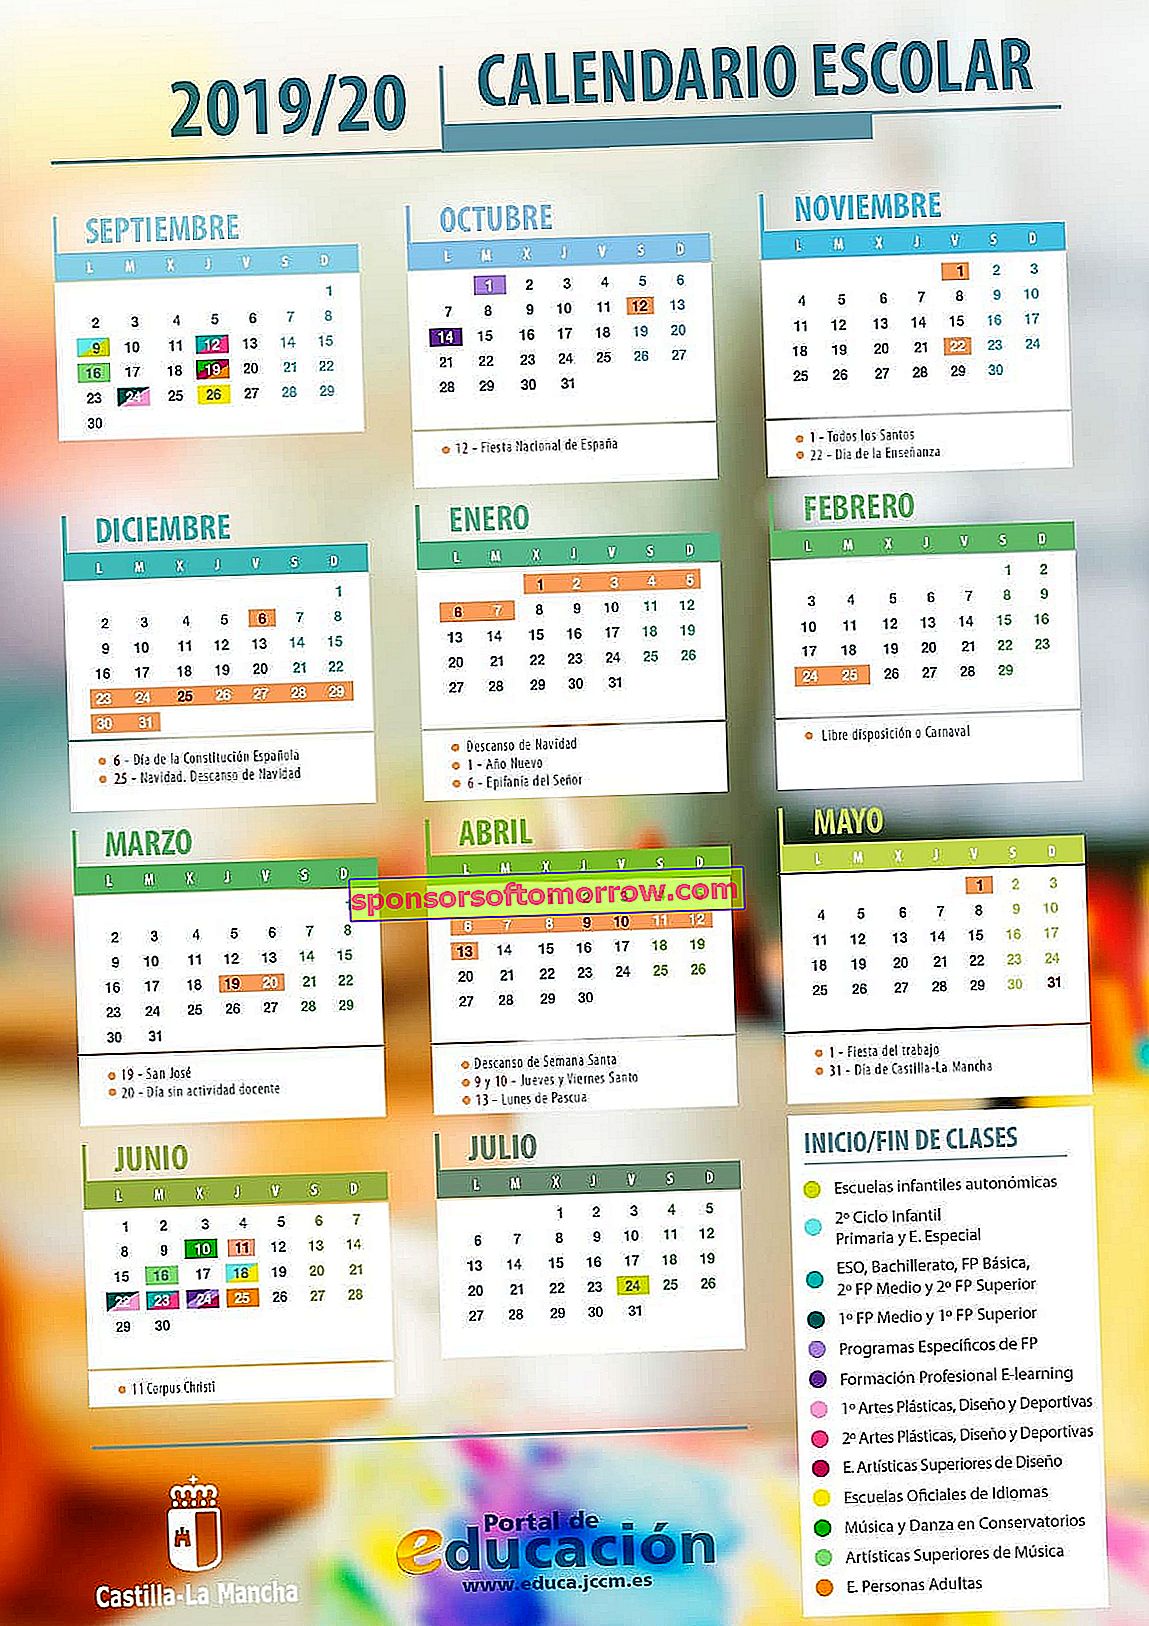 Calendrier scolaire19-20-regional_page-0001 (1)